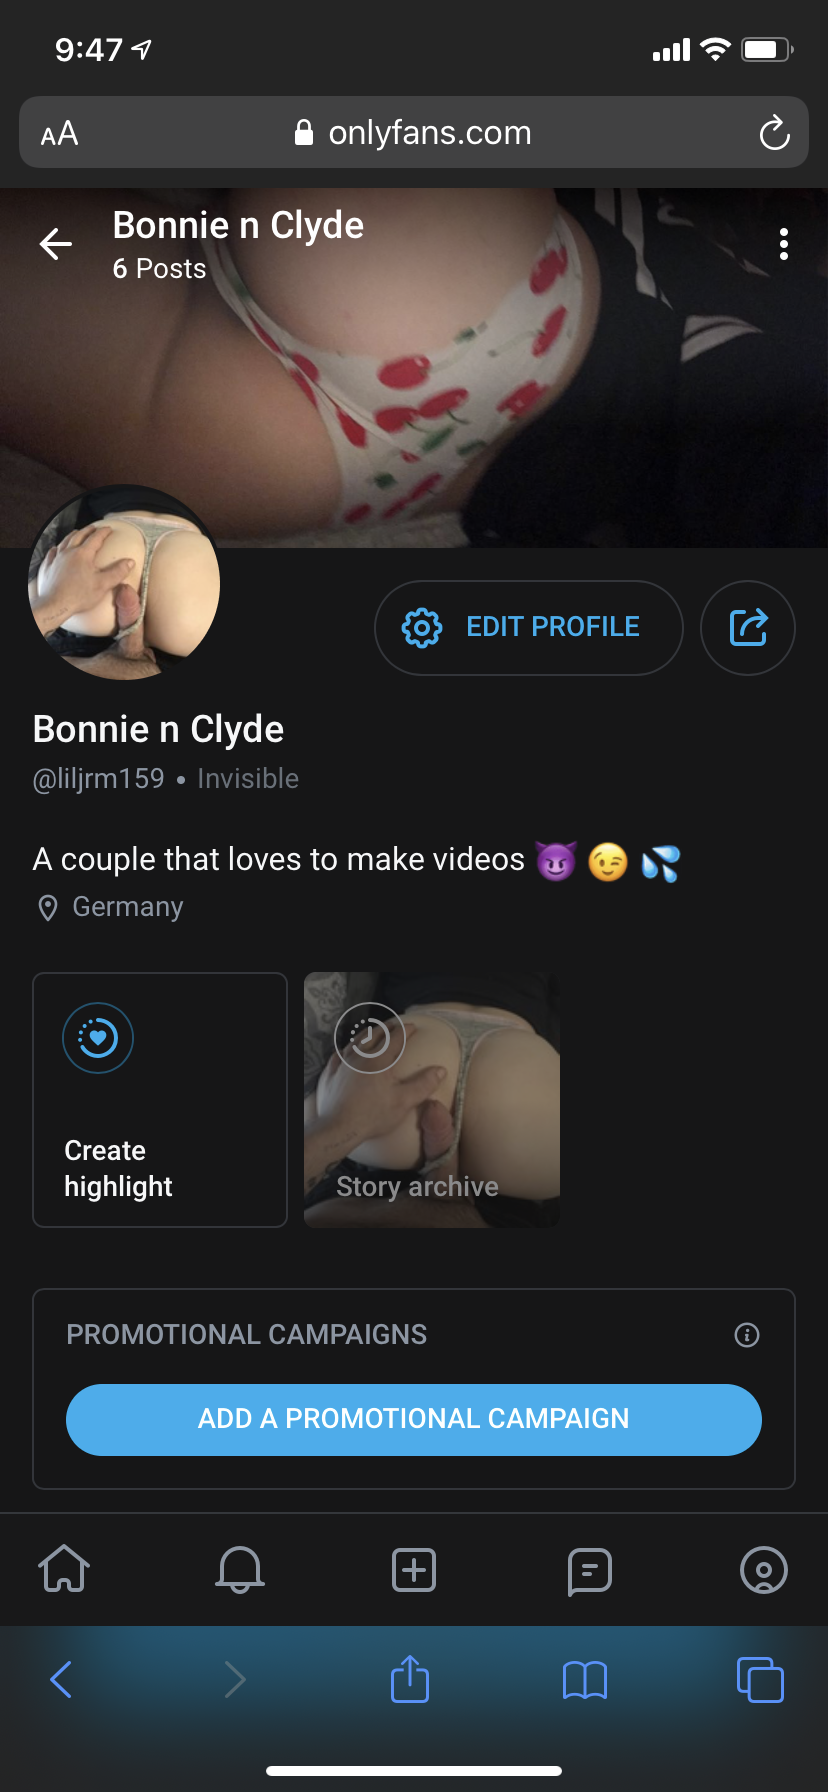 Watch the Photo by Bonnie n clyde with the username @liljman58, posted on August 26, 2020